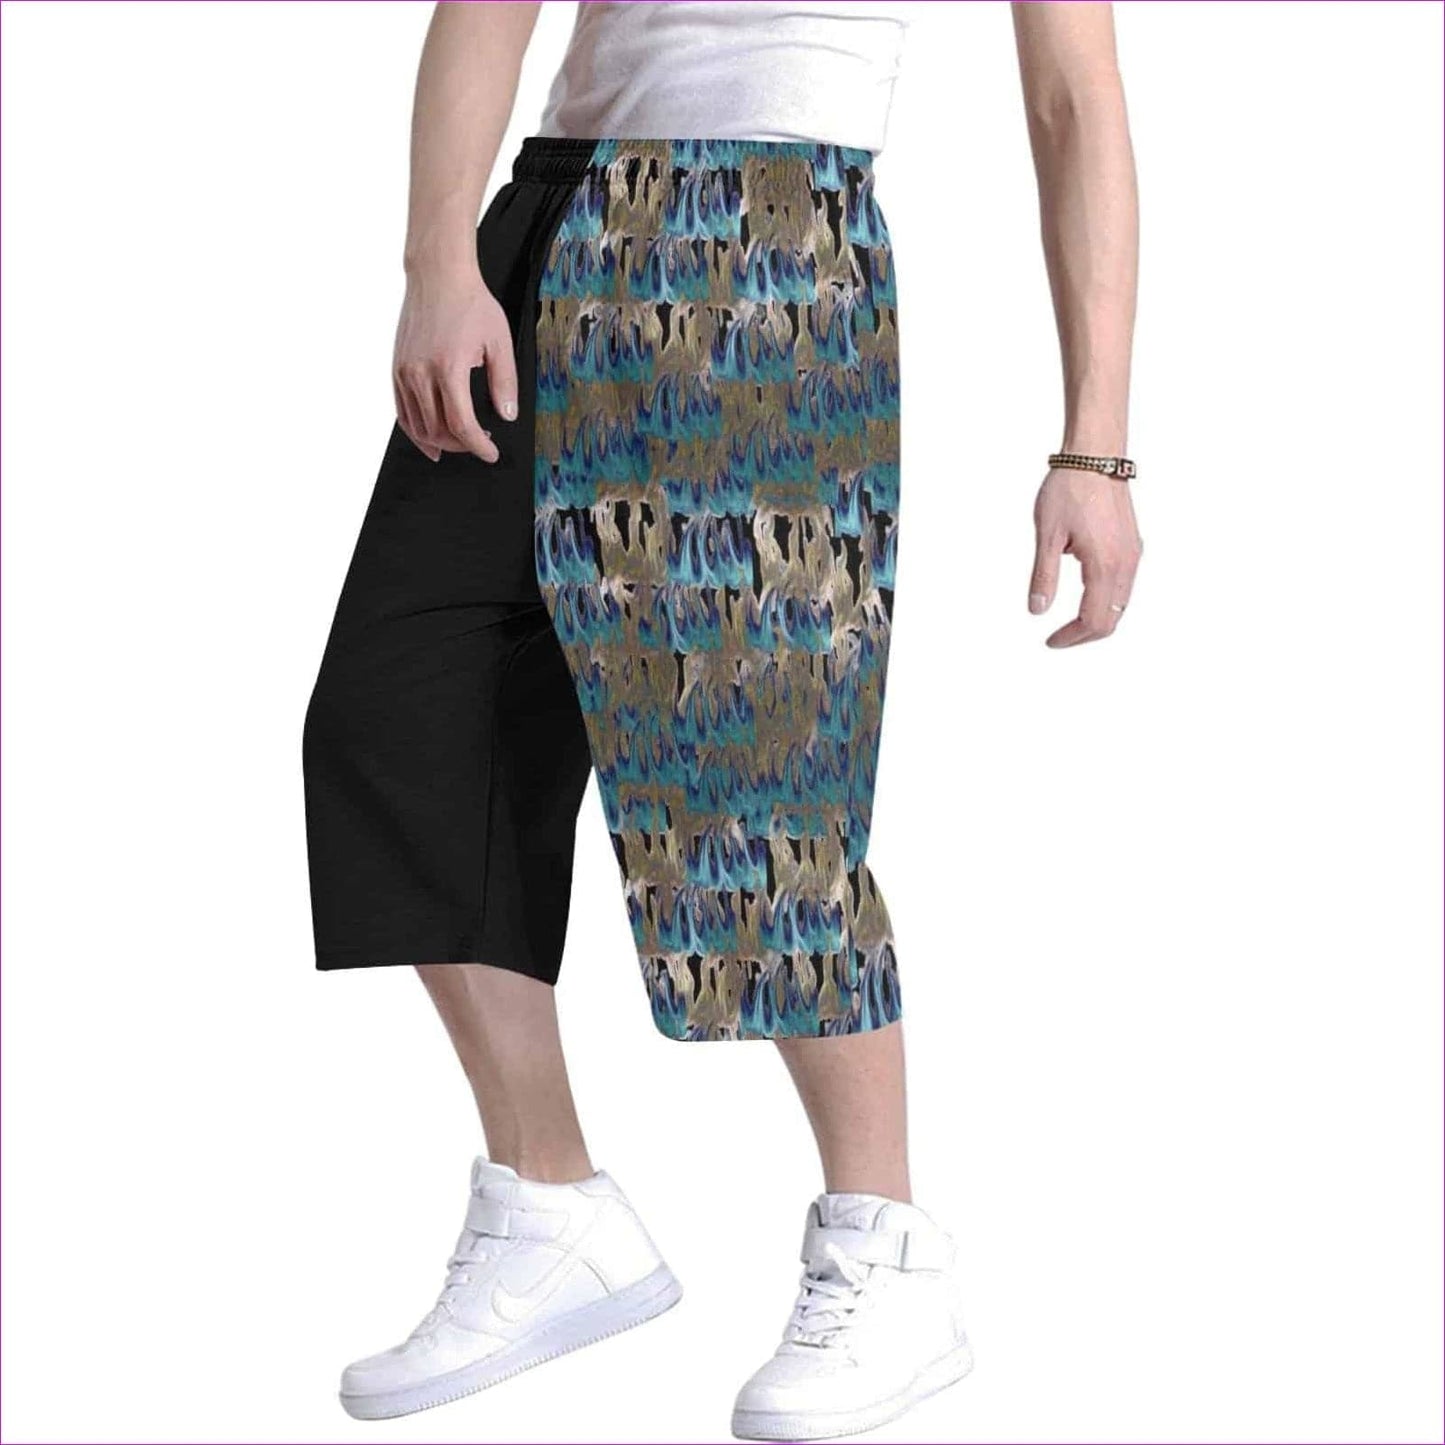 TSWG Flame Men's All Over Print Baggy Shorts (Model L37) TSWG Flame Men's Baggy Shorts - 2 Styles - men's shorts at TFC&H Co.